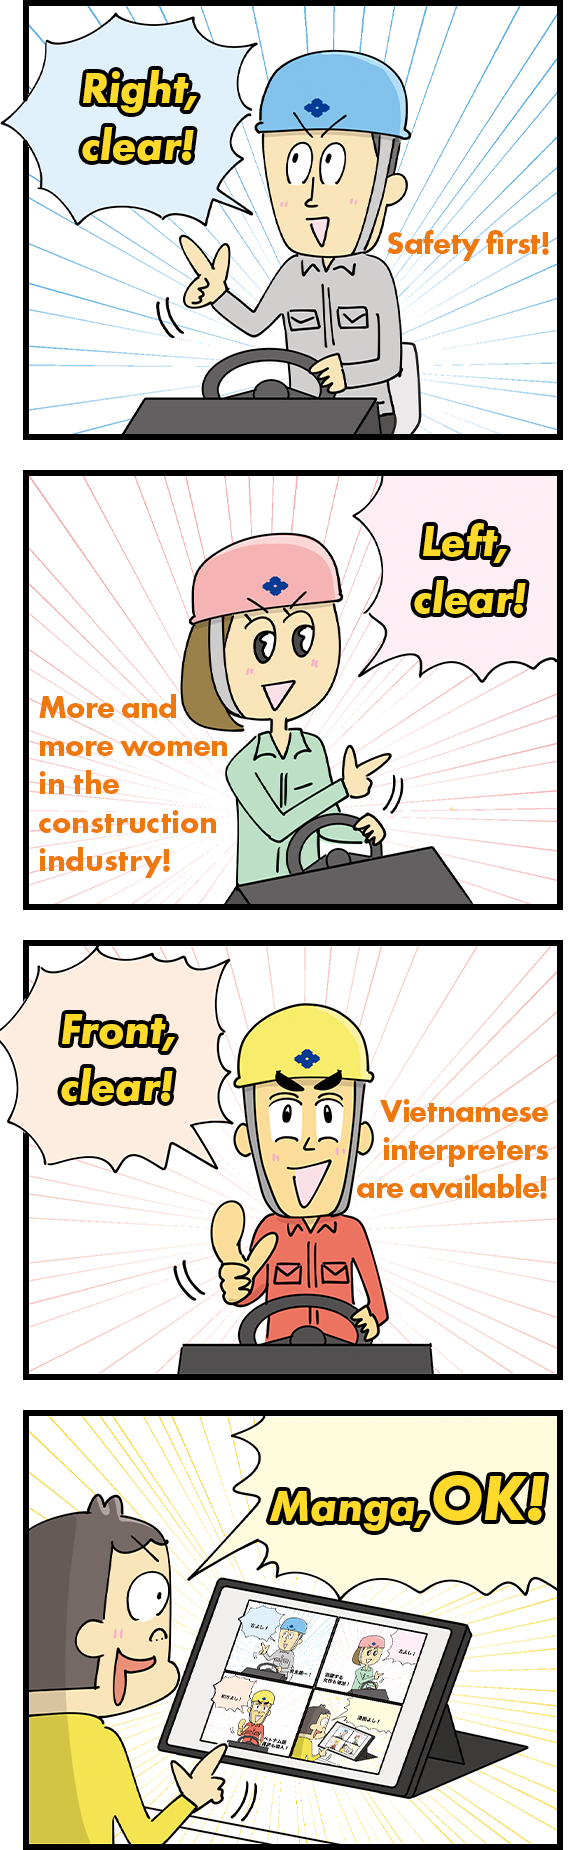 Right, clear! Safety first! Left, clear! More and more women in the construction industry! Front, clear! Vietnamese interpreters are available! Manga, OK!